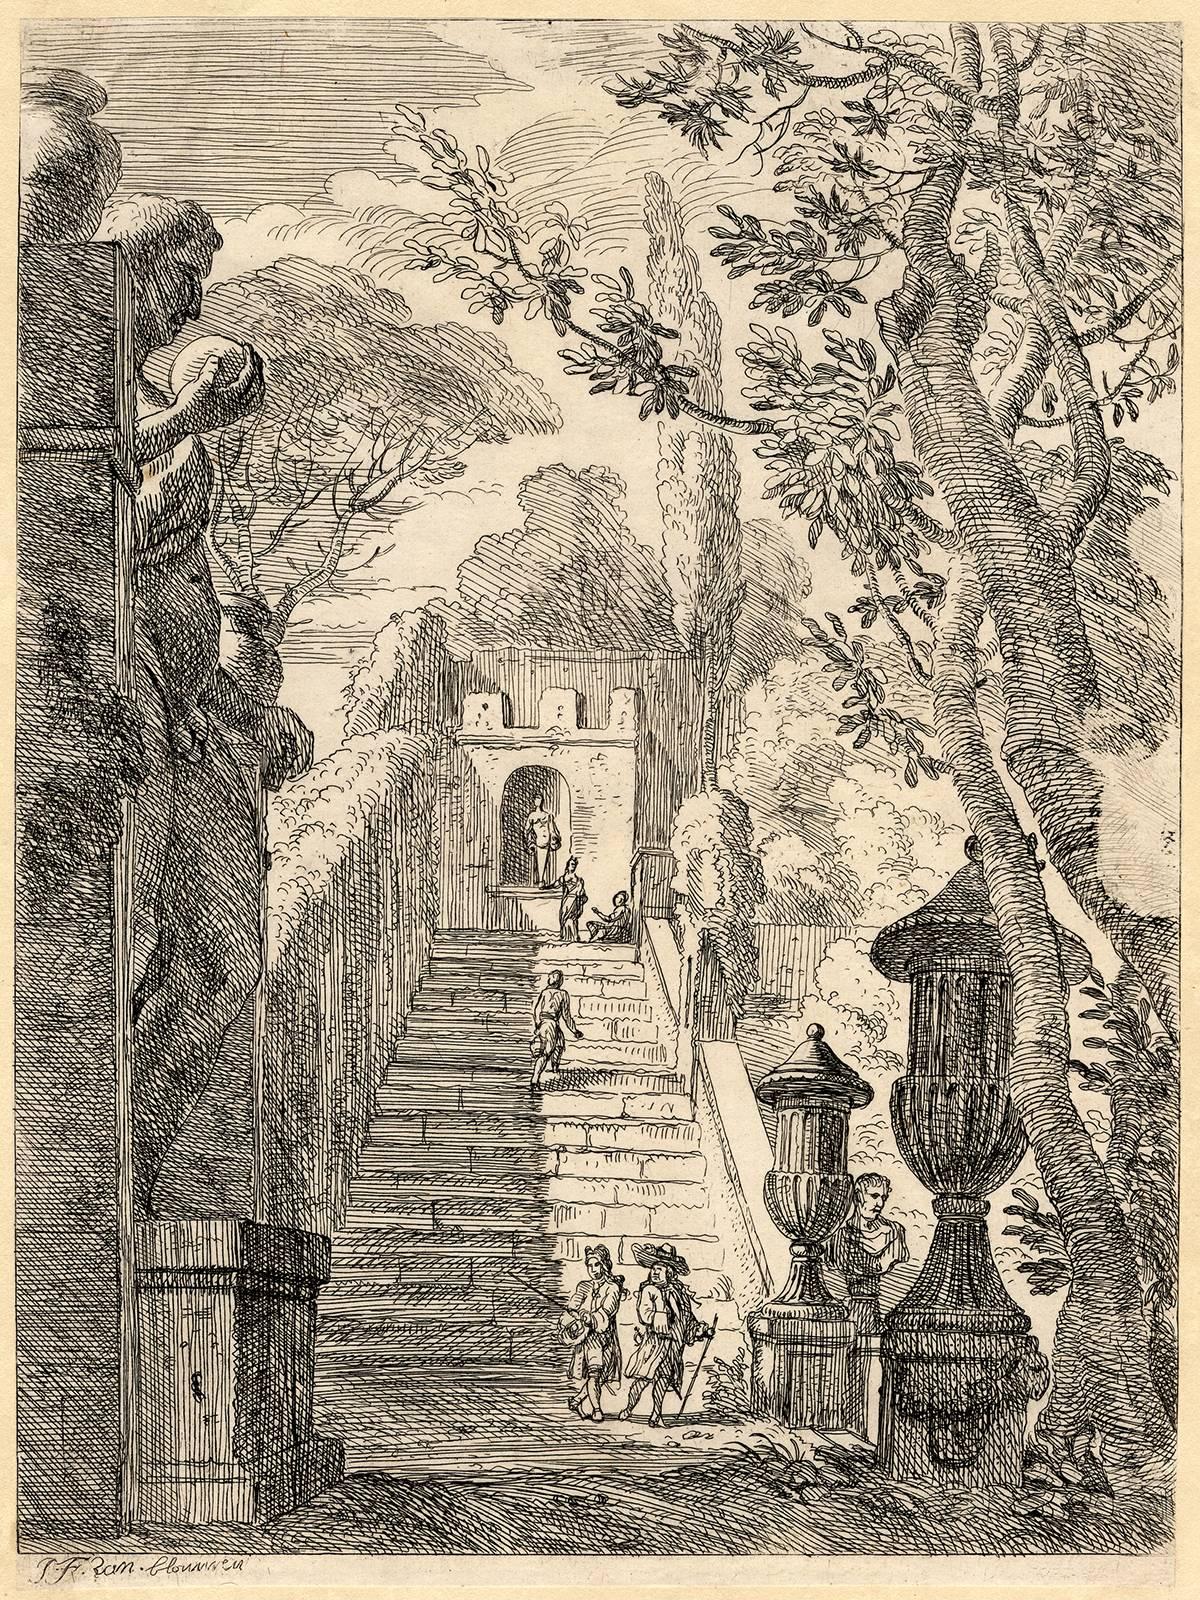 Jan Frans van Bloemen (Orizzonte) Landscape Print - Untitled - Italian garden with statues, sculpted vases and stairs.